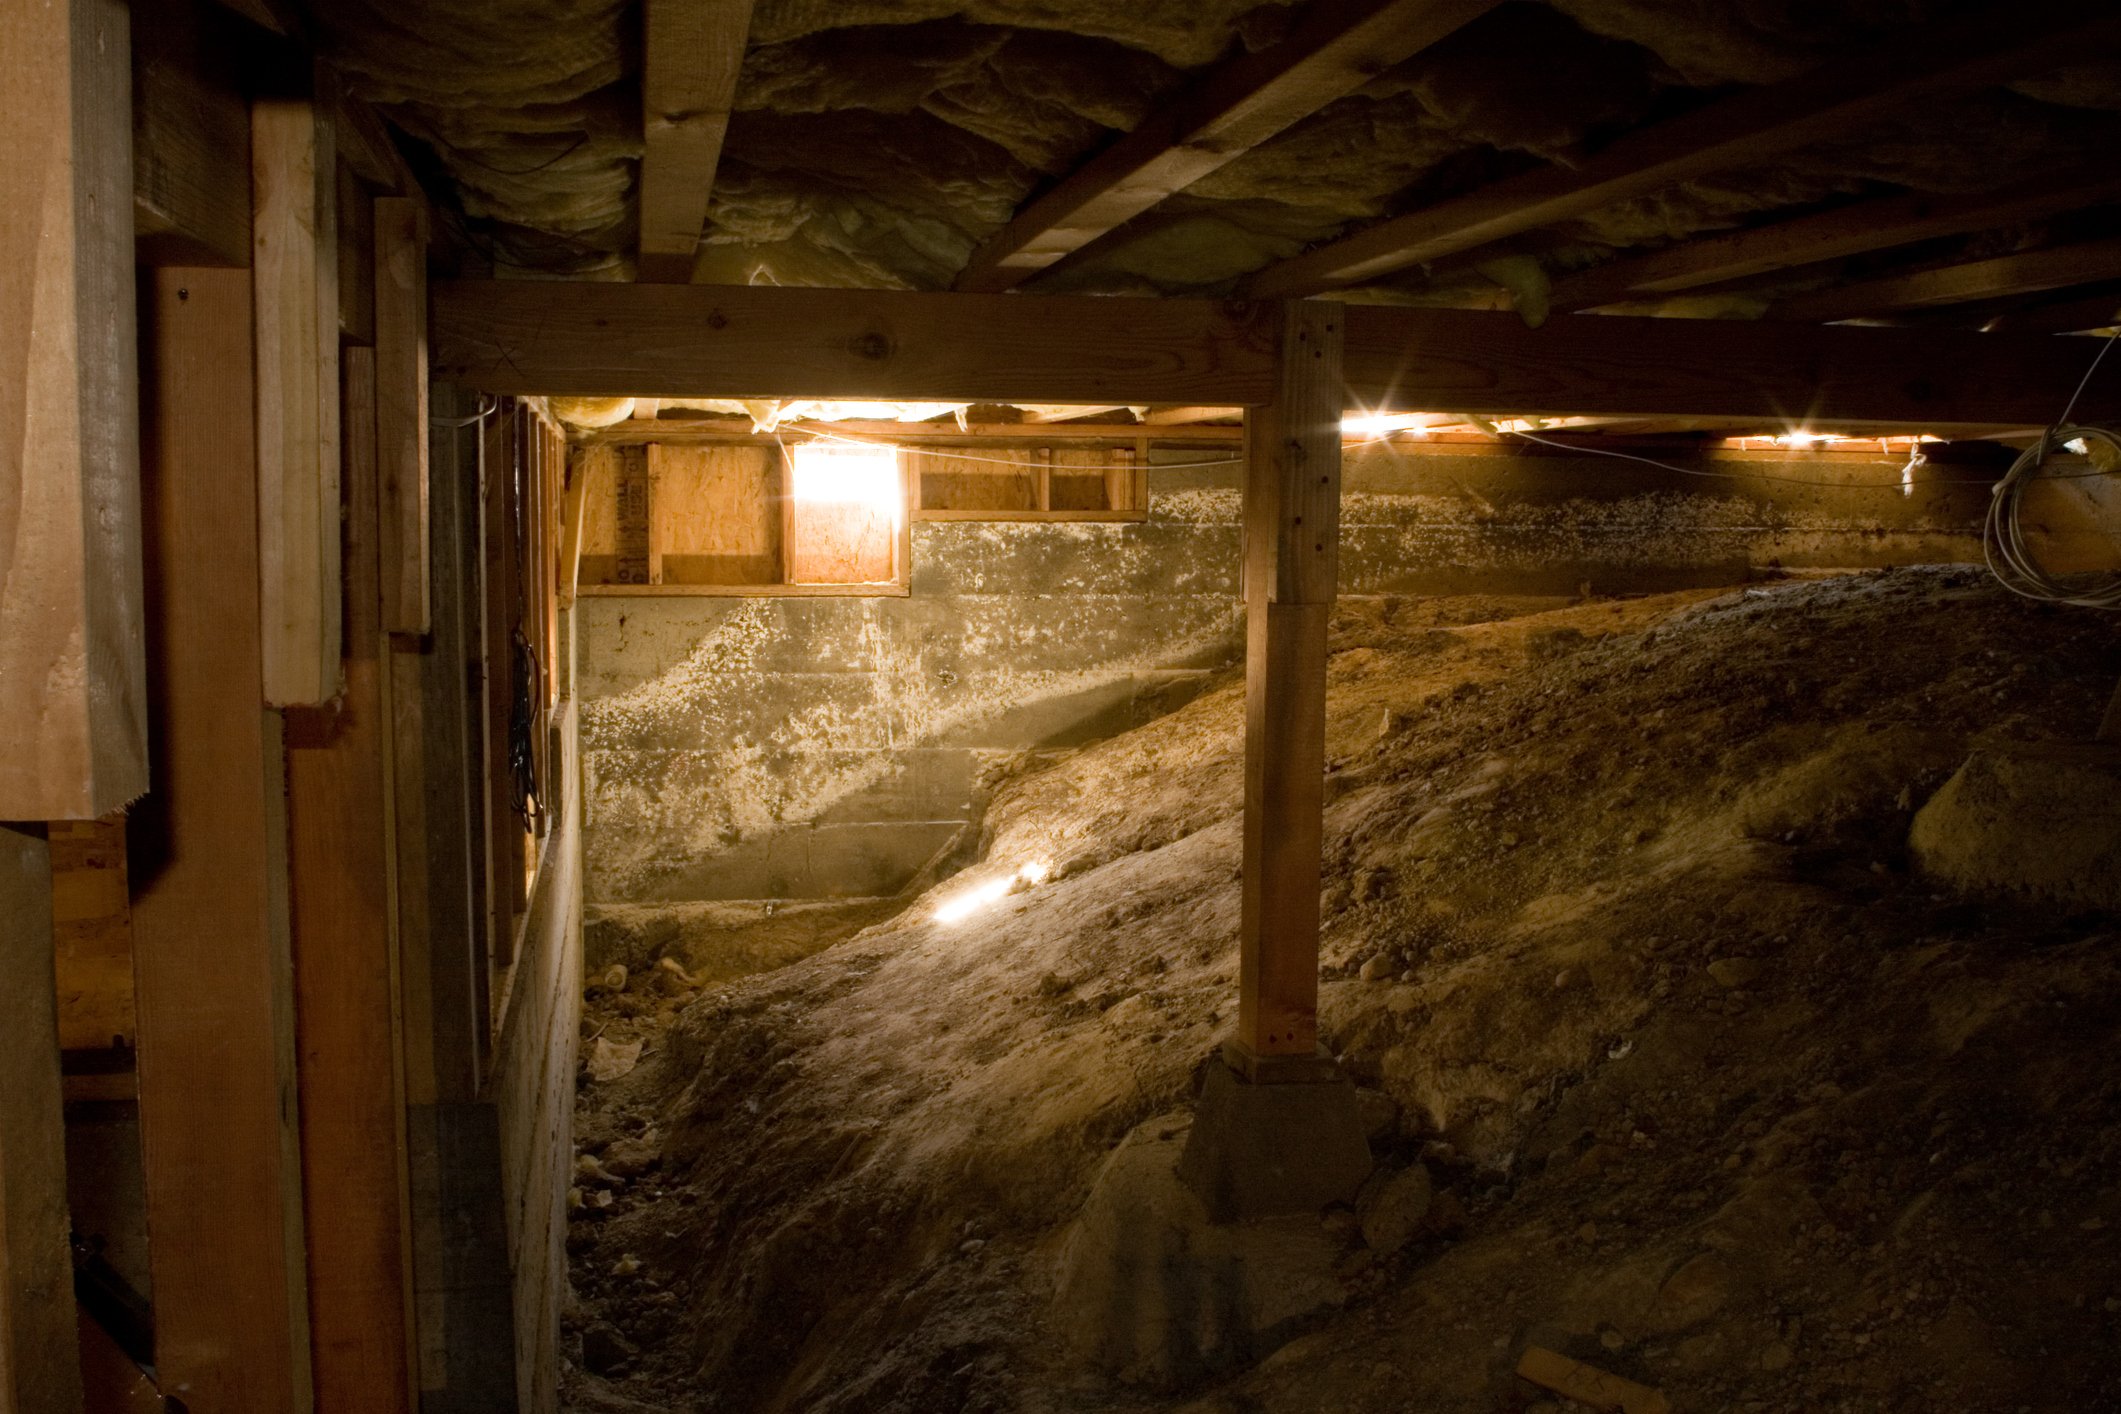 Identifying Crawl Space Problems by Smell